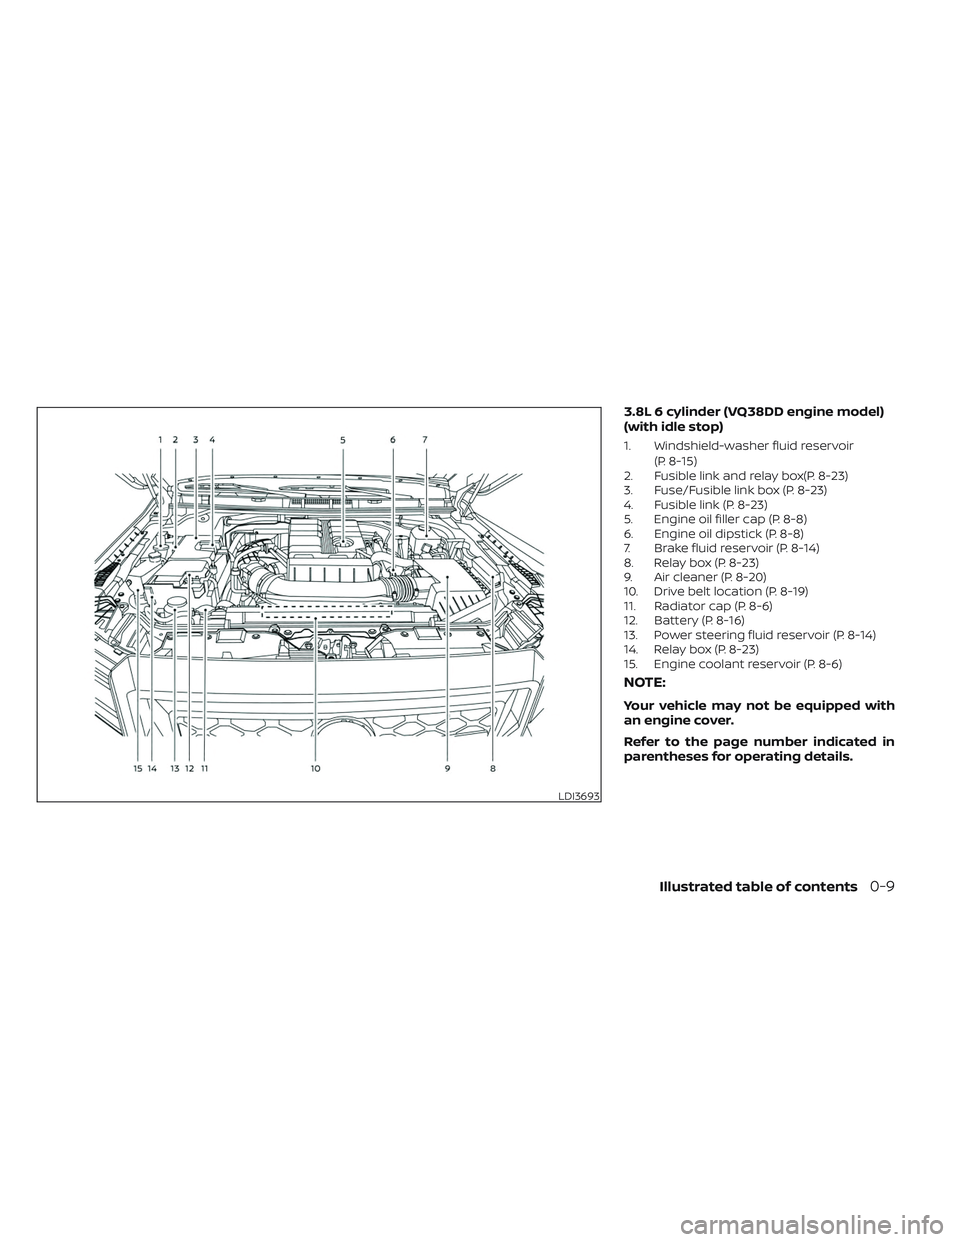 NISSAN FRONTIER 2023  Owners Manual 3.8L 6 cylinder (VQ38DD engine model)
(with idle stop)
1. Windshield-washer fluid reservoir(P. 8-15)
2. Fusible link and relay box(P. 8-23)
3. Fuse/Fusible link box (P. 8-23)
4. Fusible link (P. 8-23)